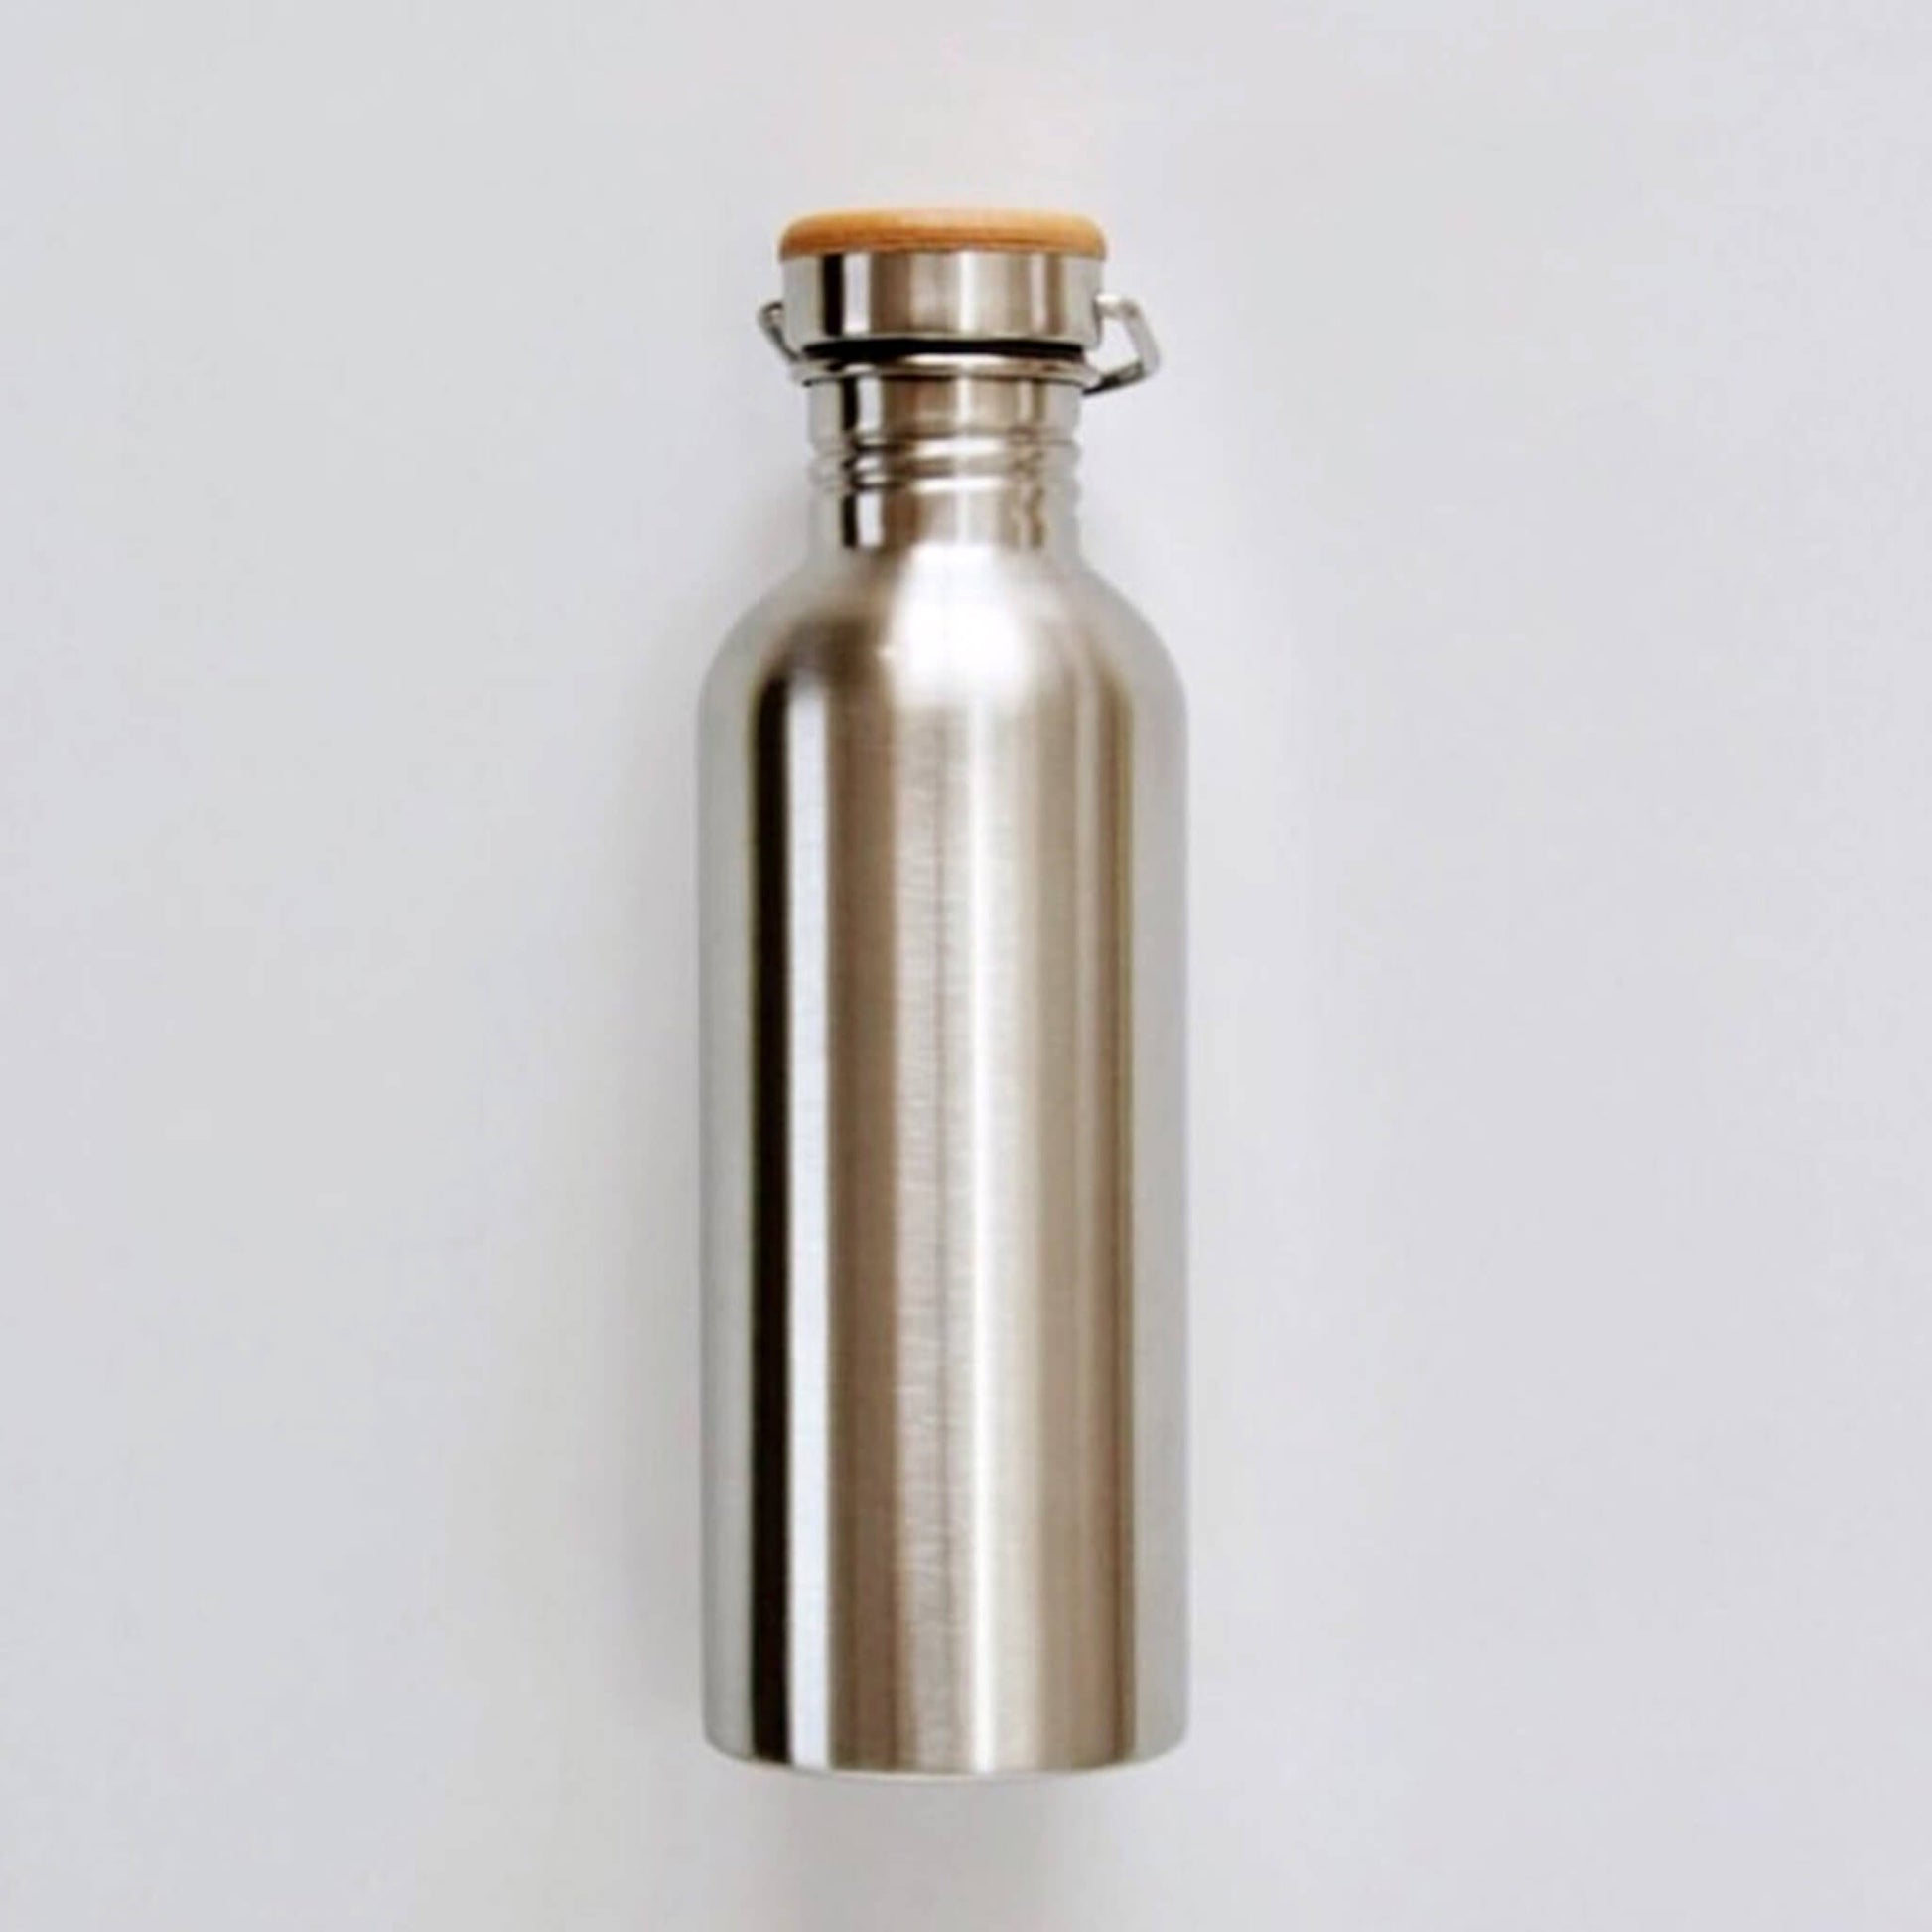 Insulated Stainless Steel Bottle 750ml - Unik by Nature